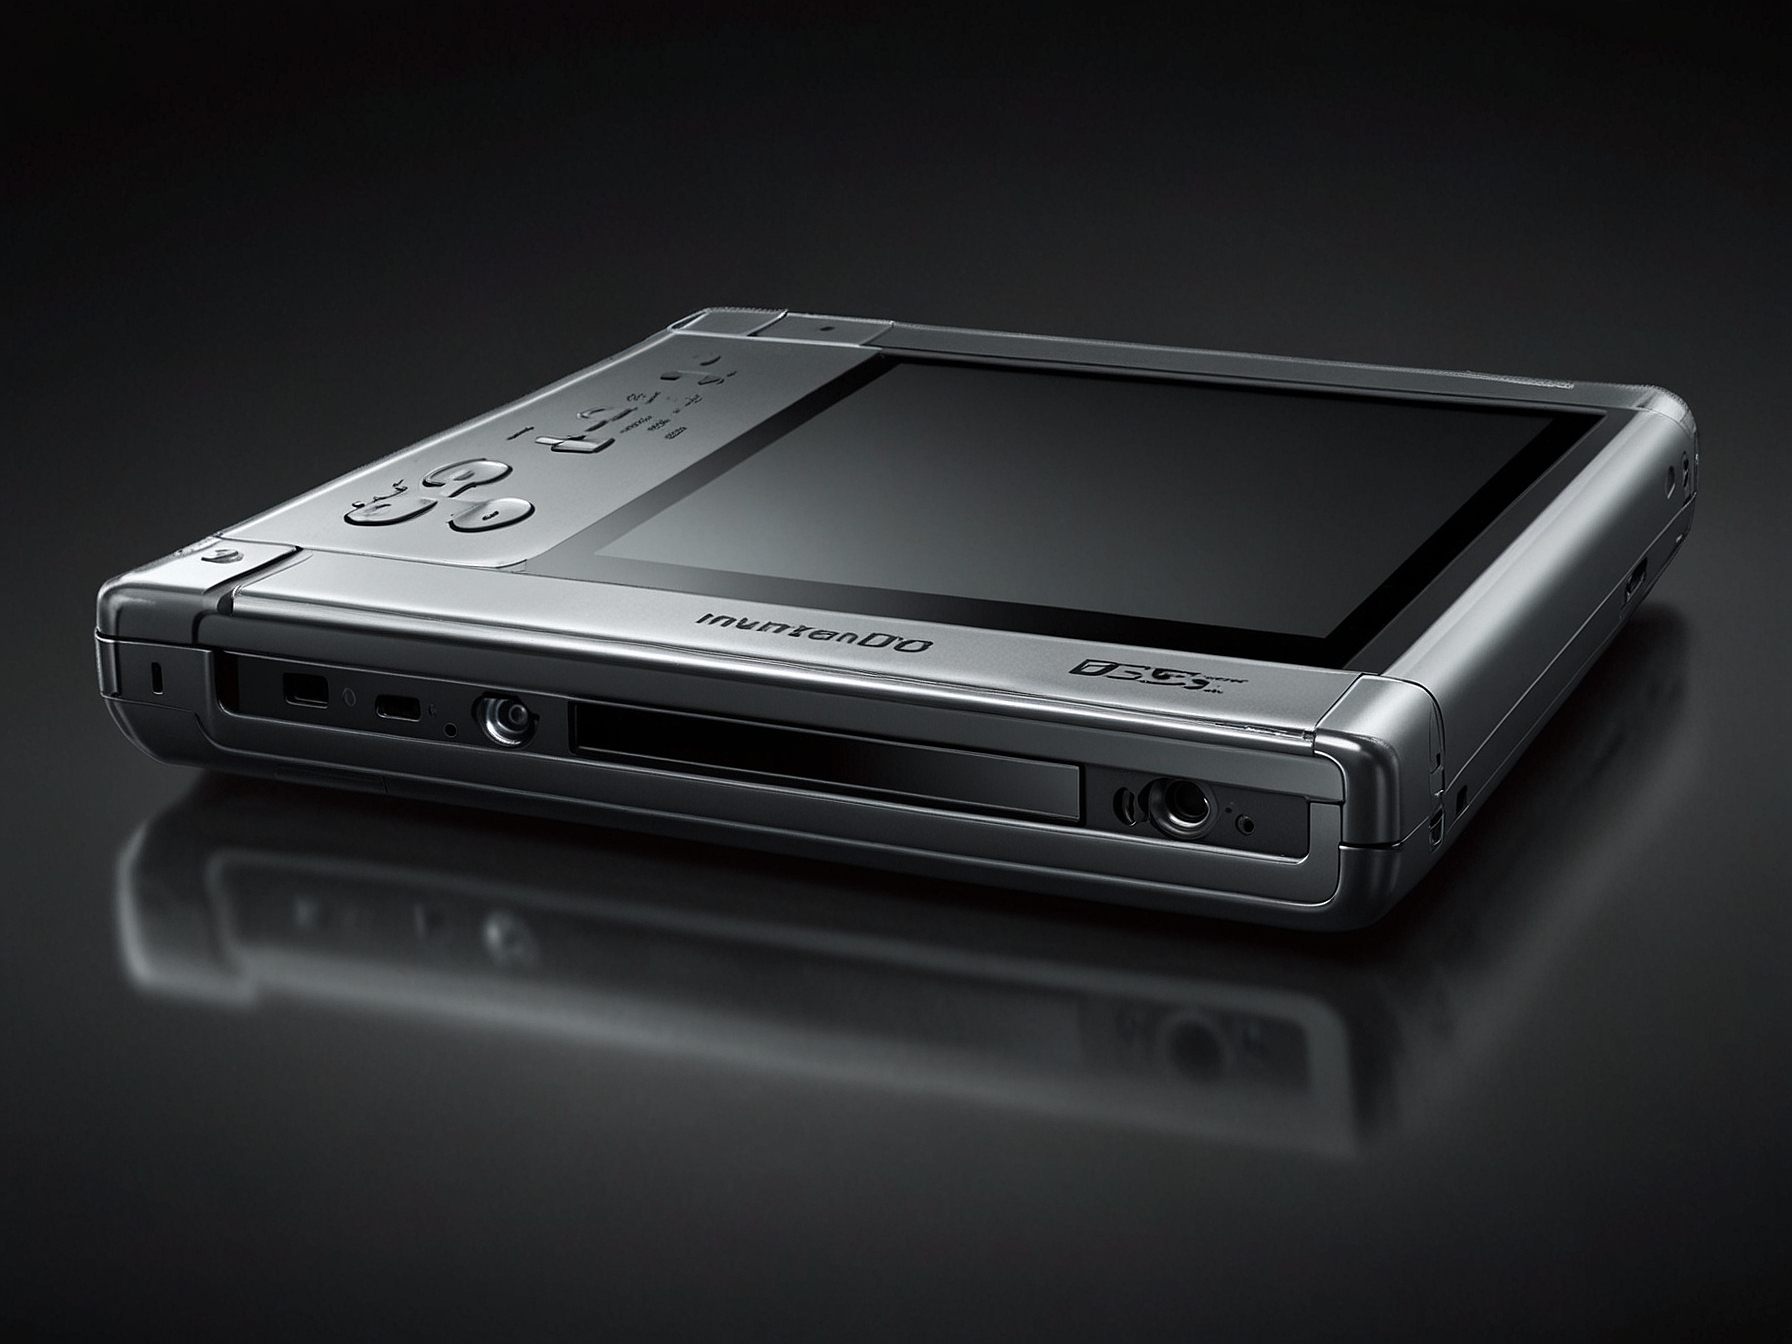 The Nintendo DS Lite, a slim and sleek redesign of the original DS, which played a crucial role in redefining handheld gaming.